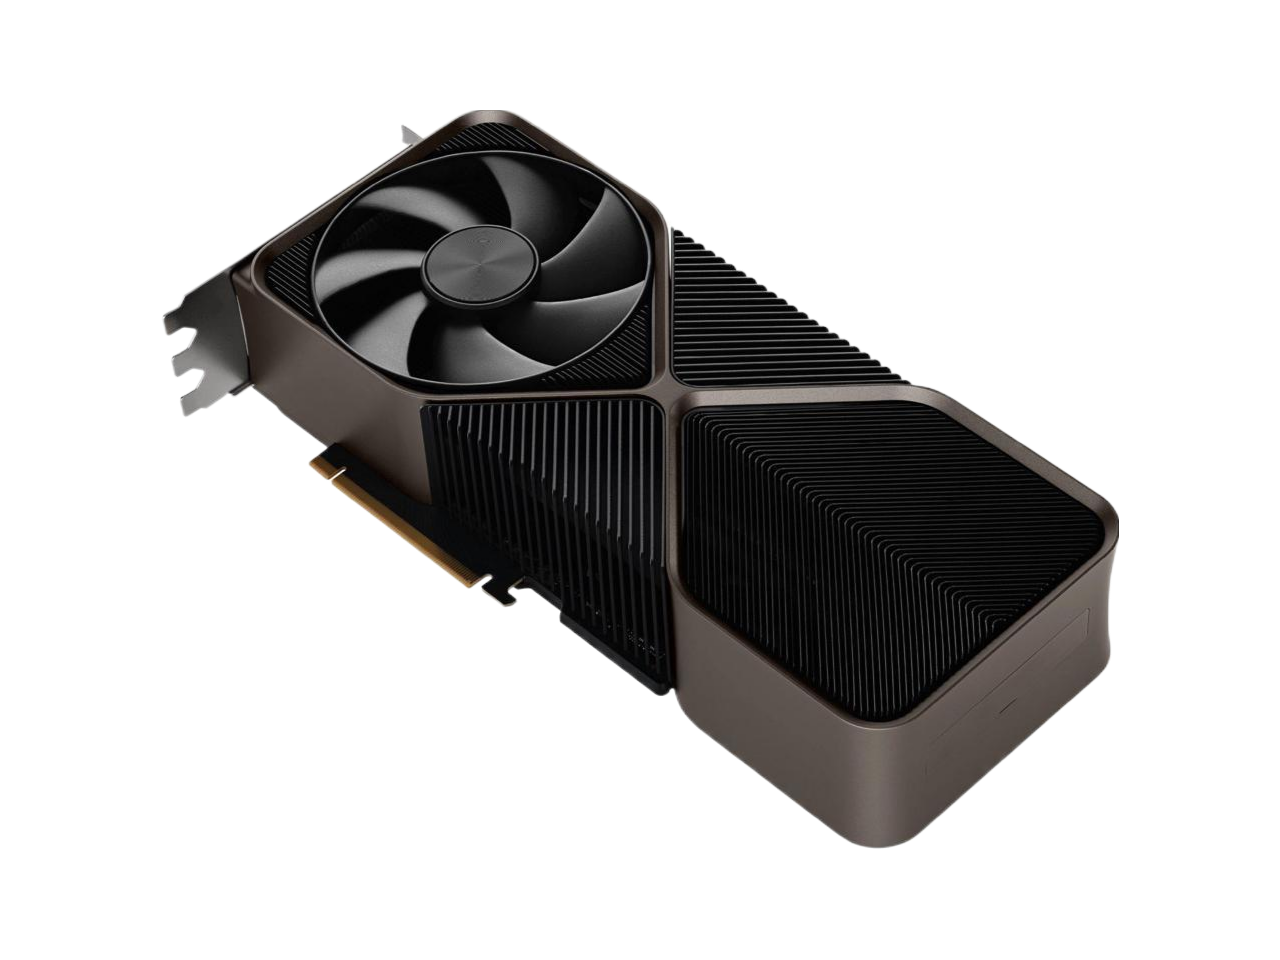 NVIDIA GeForce RTX 4080 16GB Founders Edition GDDR6X PCI Express 4.0 Titanium and black Video Graphics Card 900-1G136-2560-000